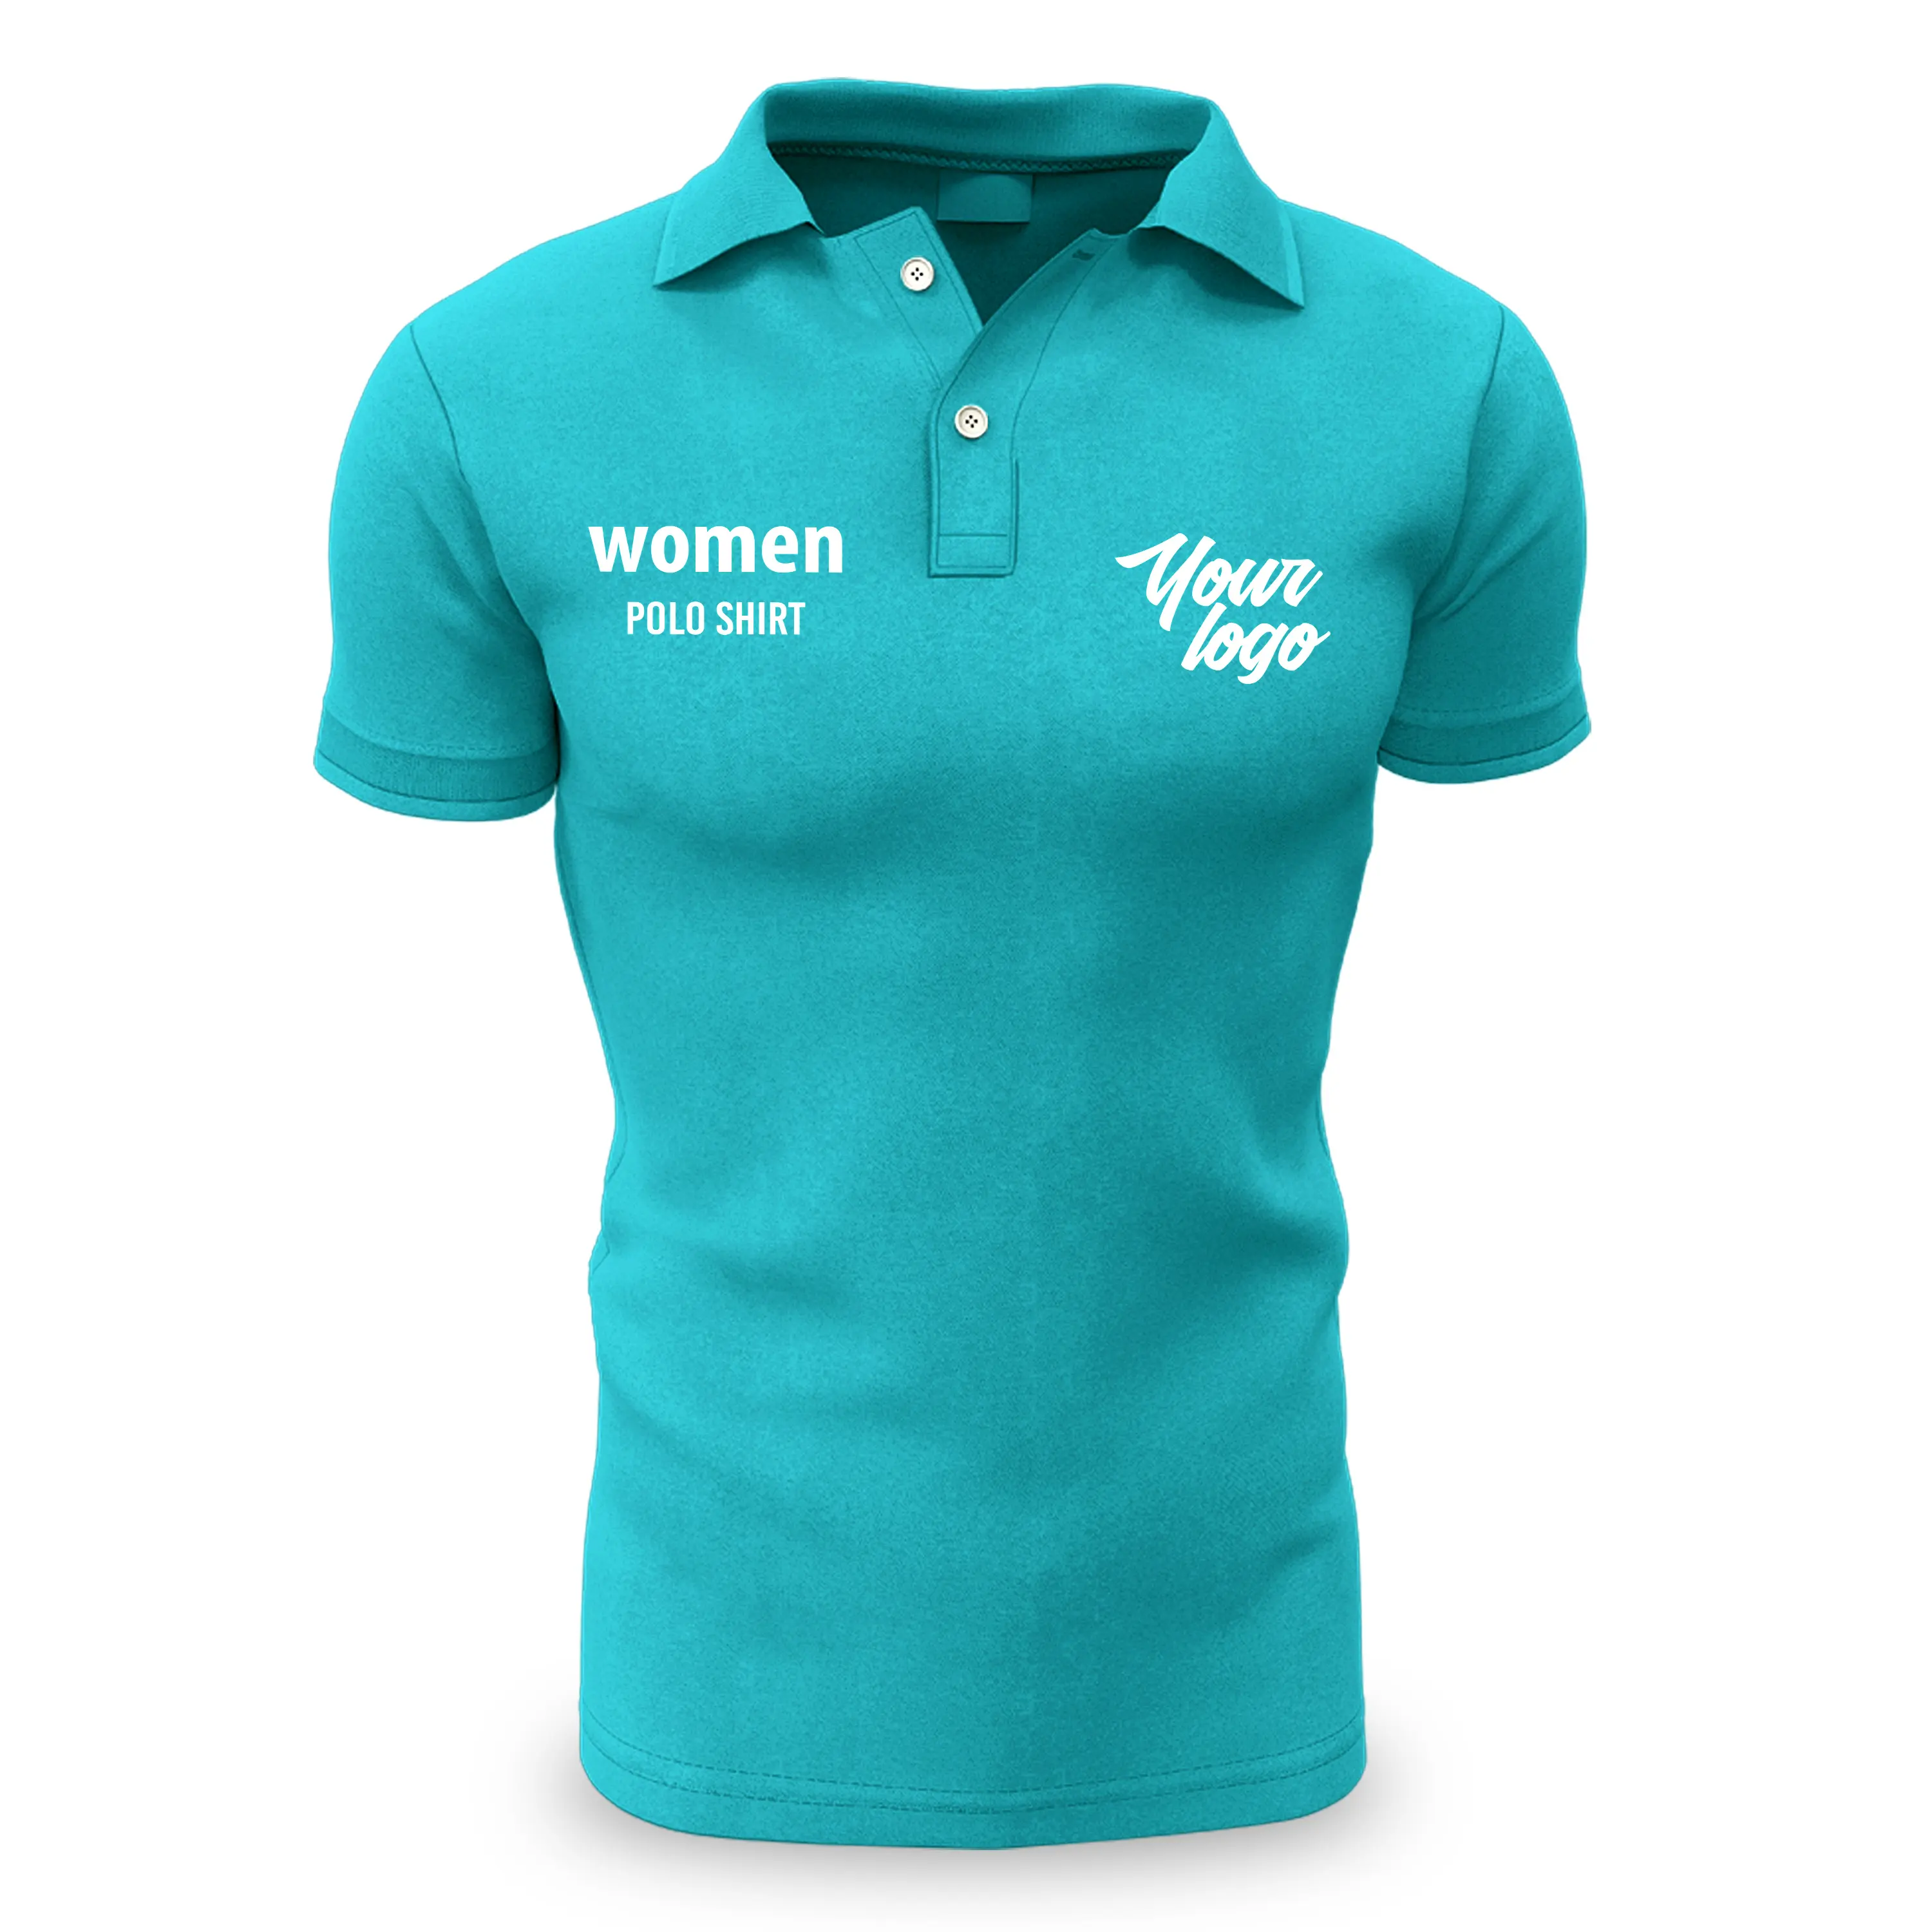 Custom Dye Sublimation Printing Women Girl Lady apparel Design Polo Clothing Brands Golf shirt menufecture in Banglade